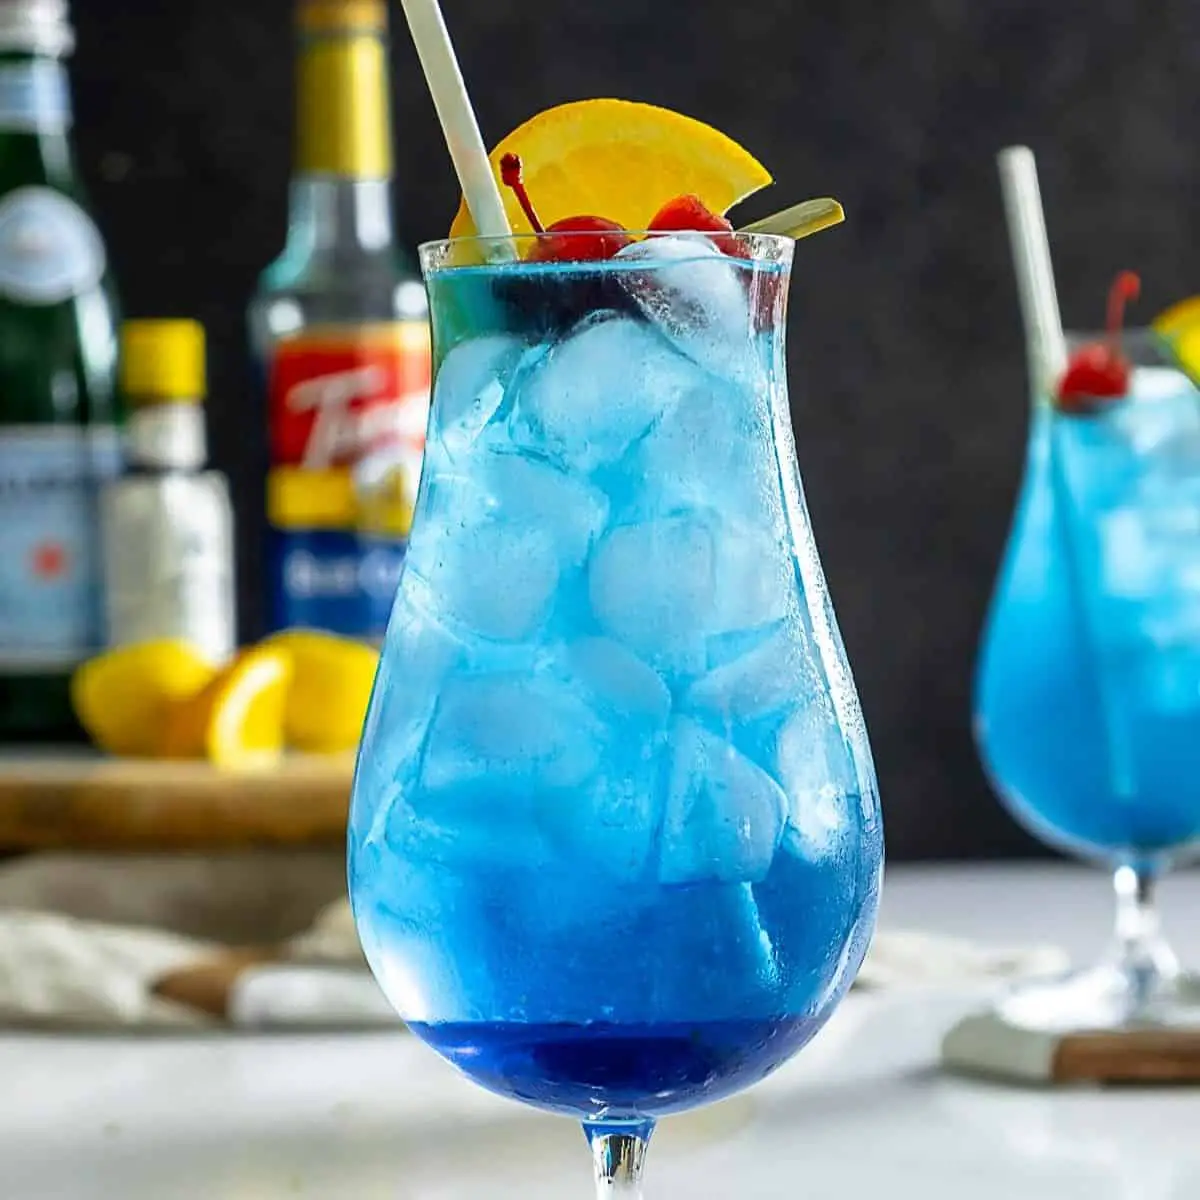 Best Blue Lagoon Cocktail Recipe 2022 [Pro Tips and Ingredients]